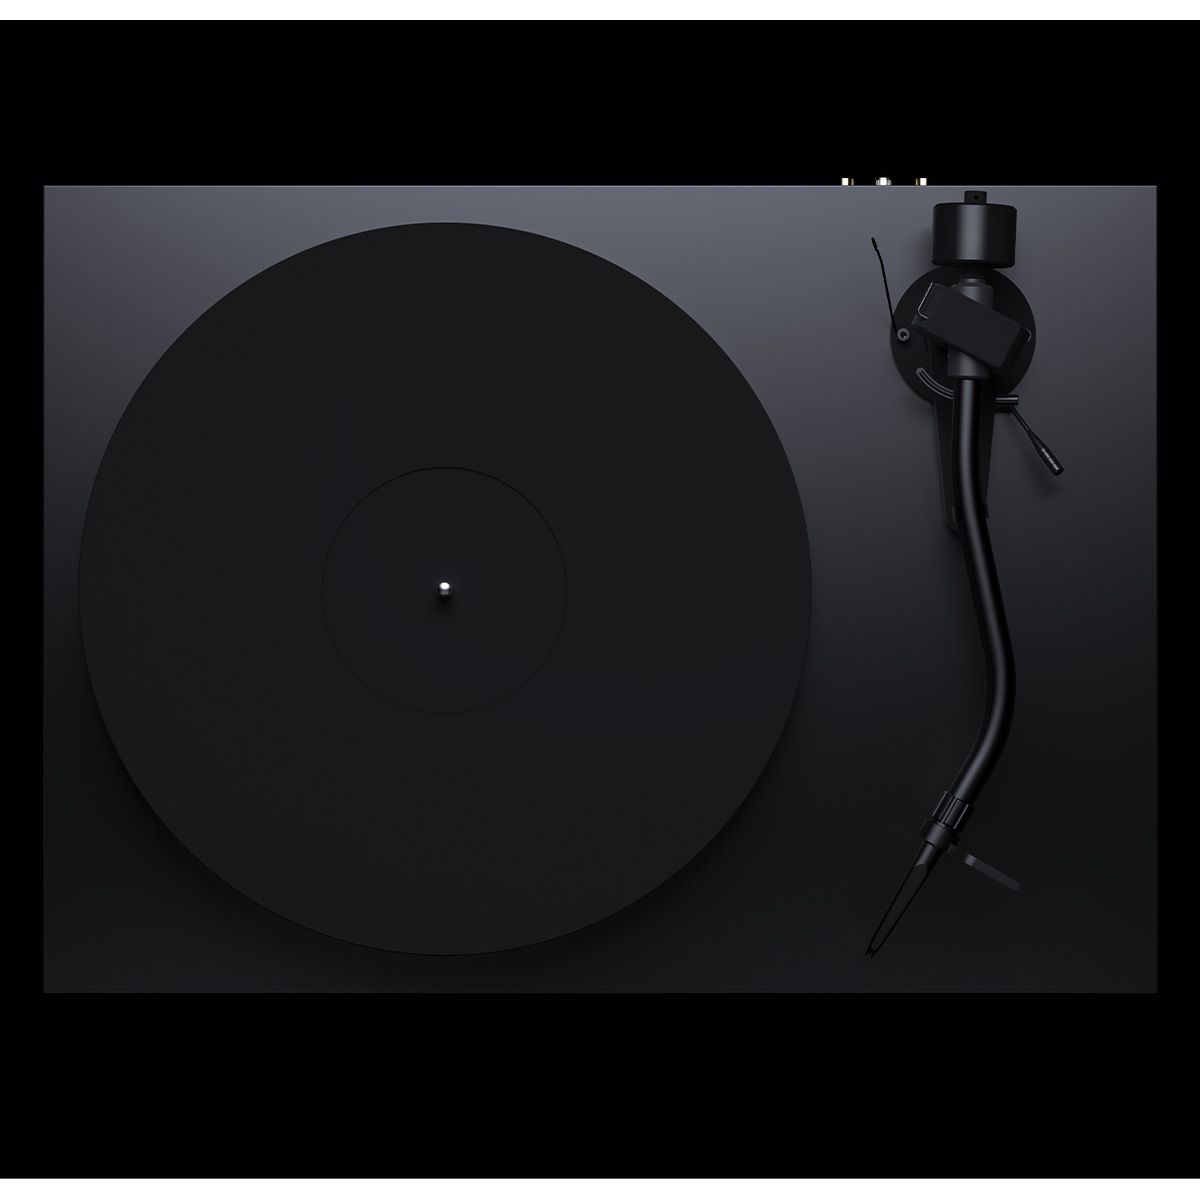 Top down view Pro-Ject Debut Pro S Turntable in Satin Black on black background showing platter and s-shaped tonearm